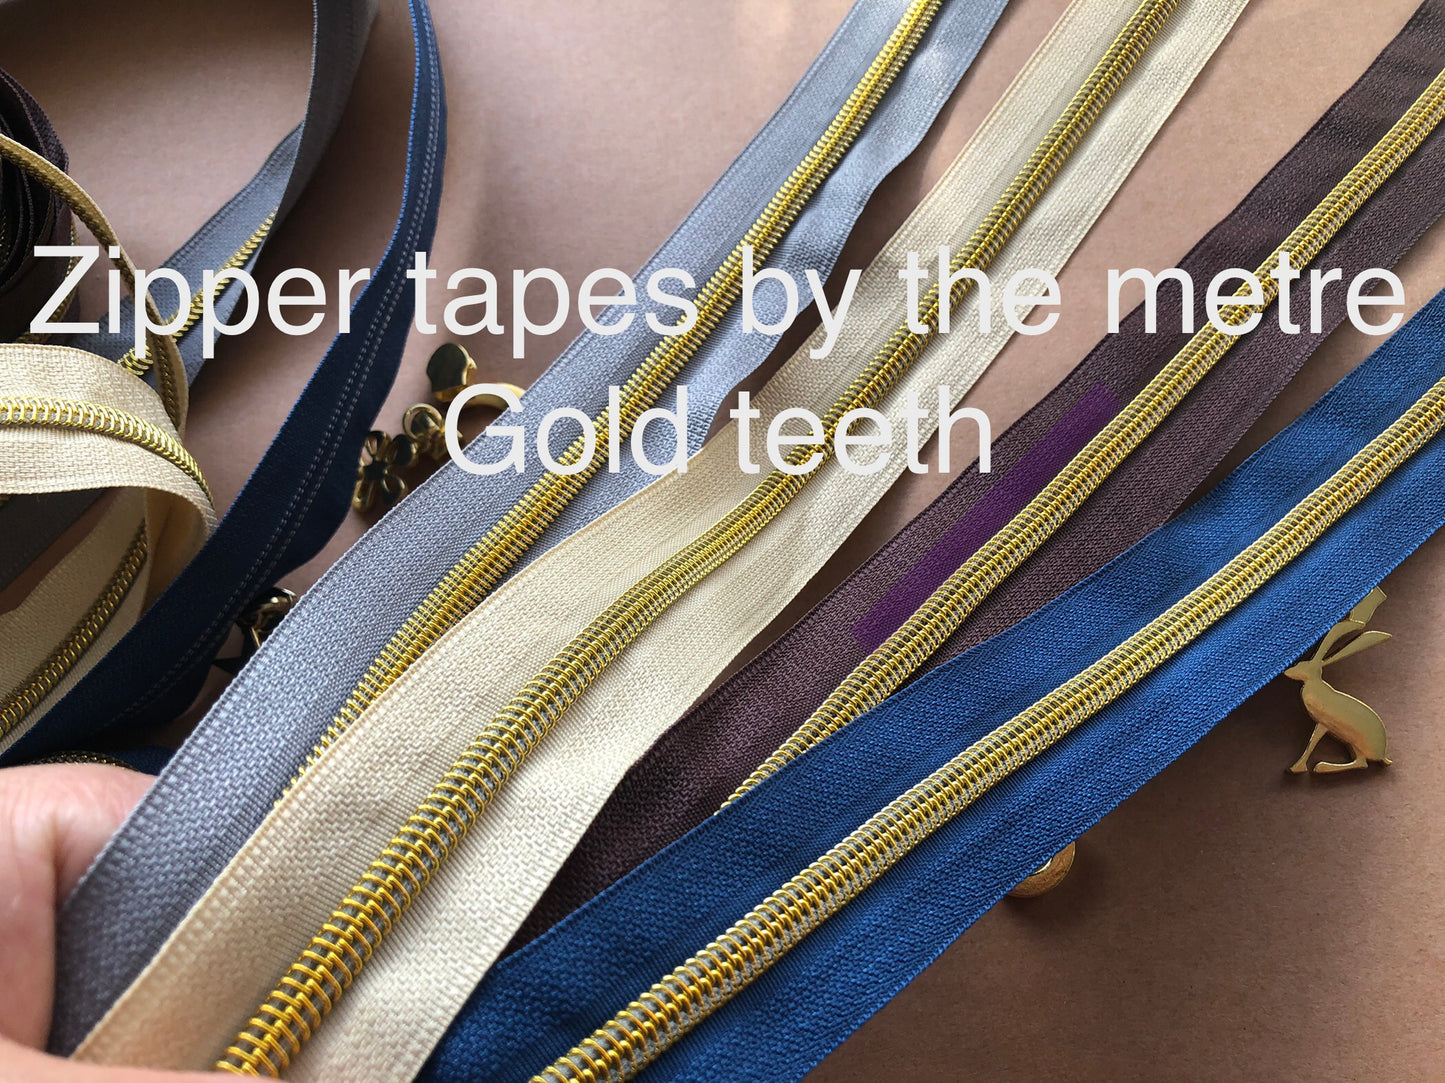 Gold color teeth size 5 zipper tapes, cut to length zipper tapes, zipper tapes for bags, zipper tape by the metre